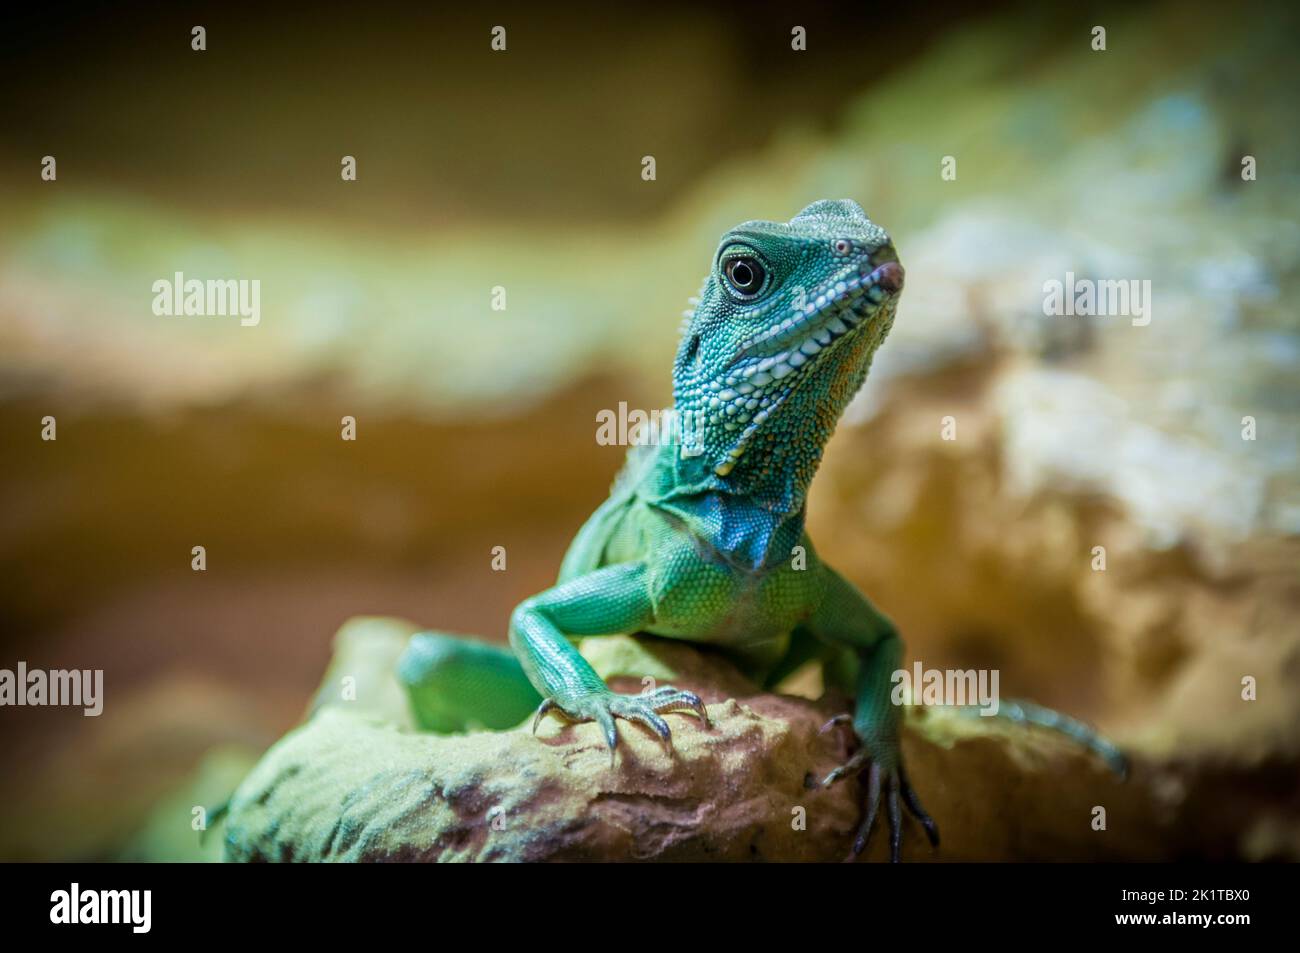 Three-quarter view of a single Green Water Dragon (lat: Physignathus cocincinus) on loamy soil against a blurred background. Stock Photo